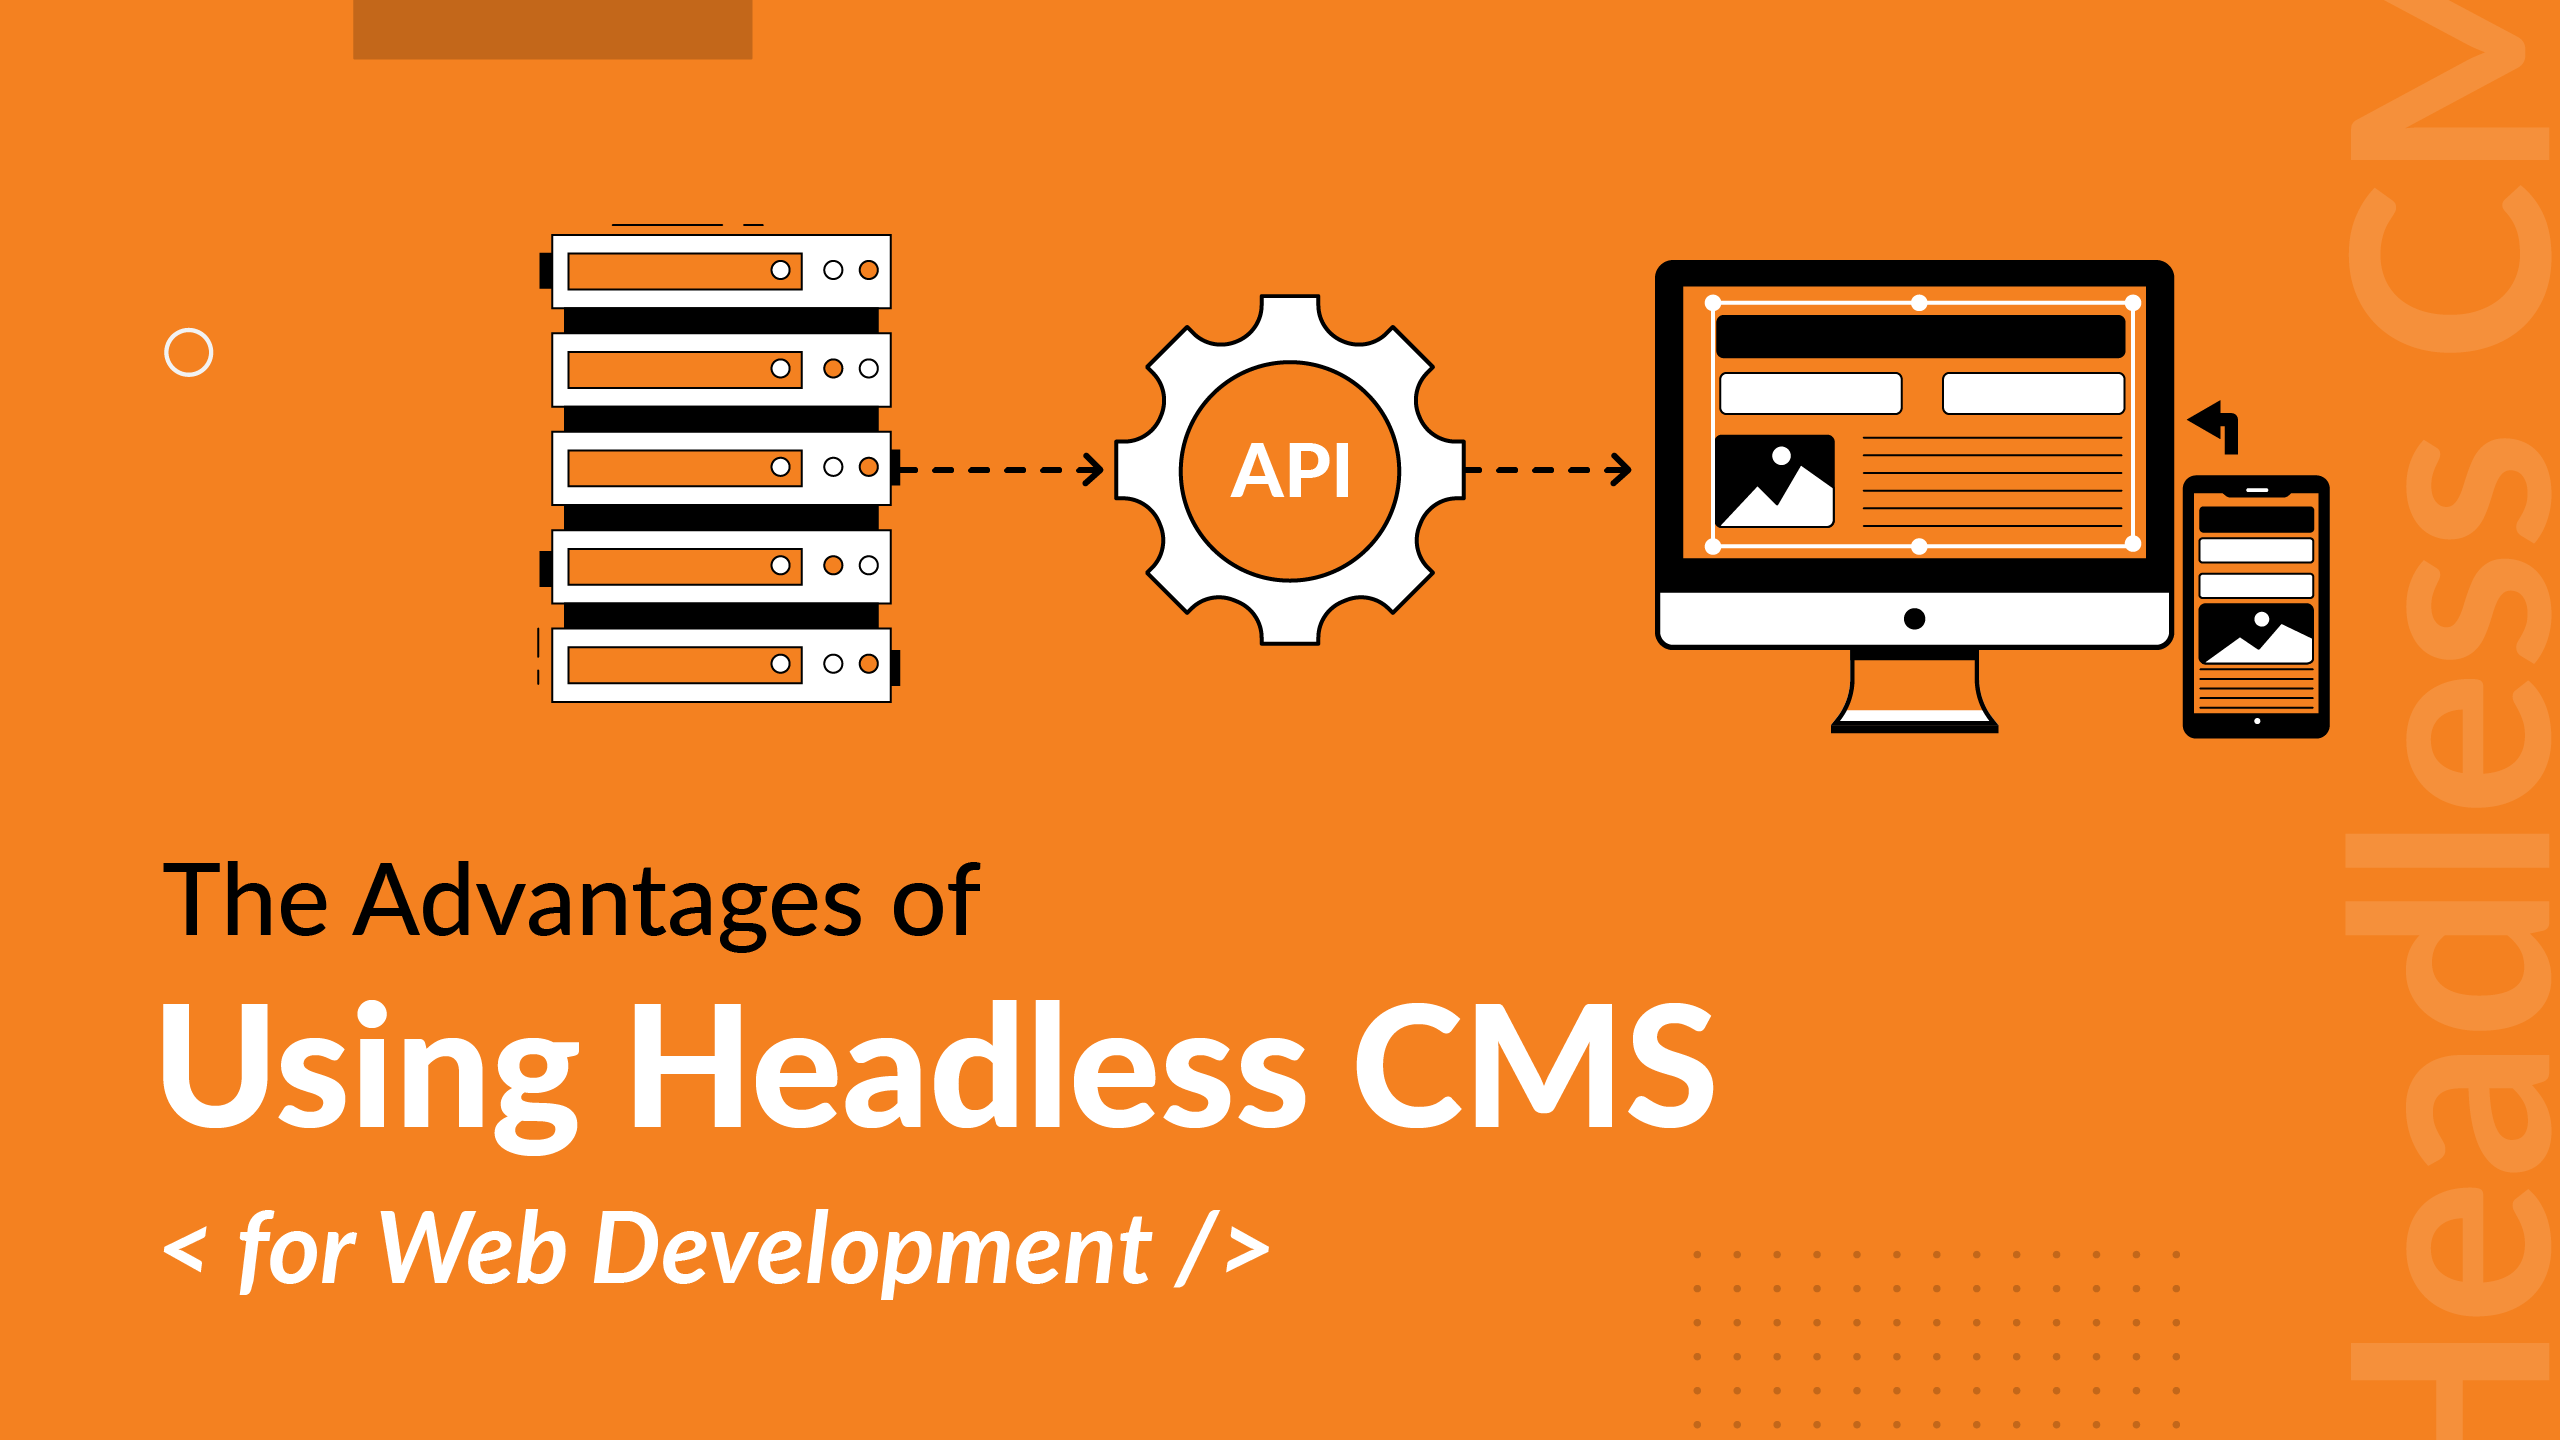 The Advantages of Using a Headless CMS for Web Development